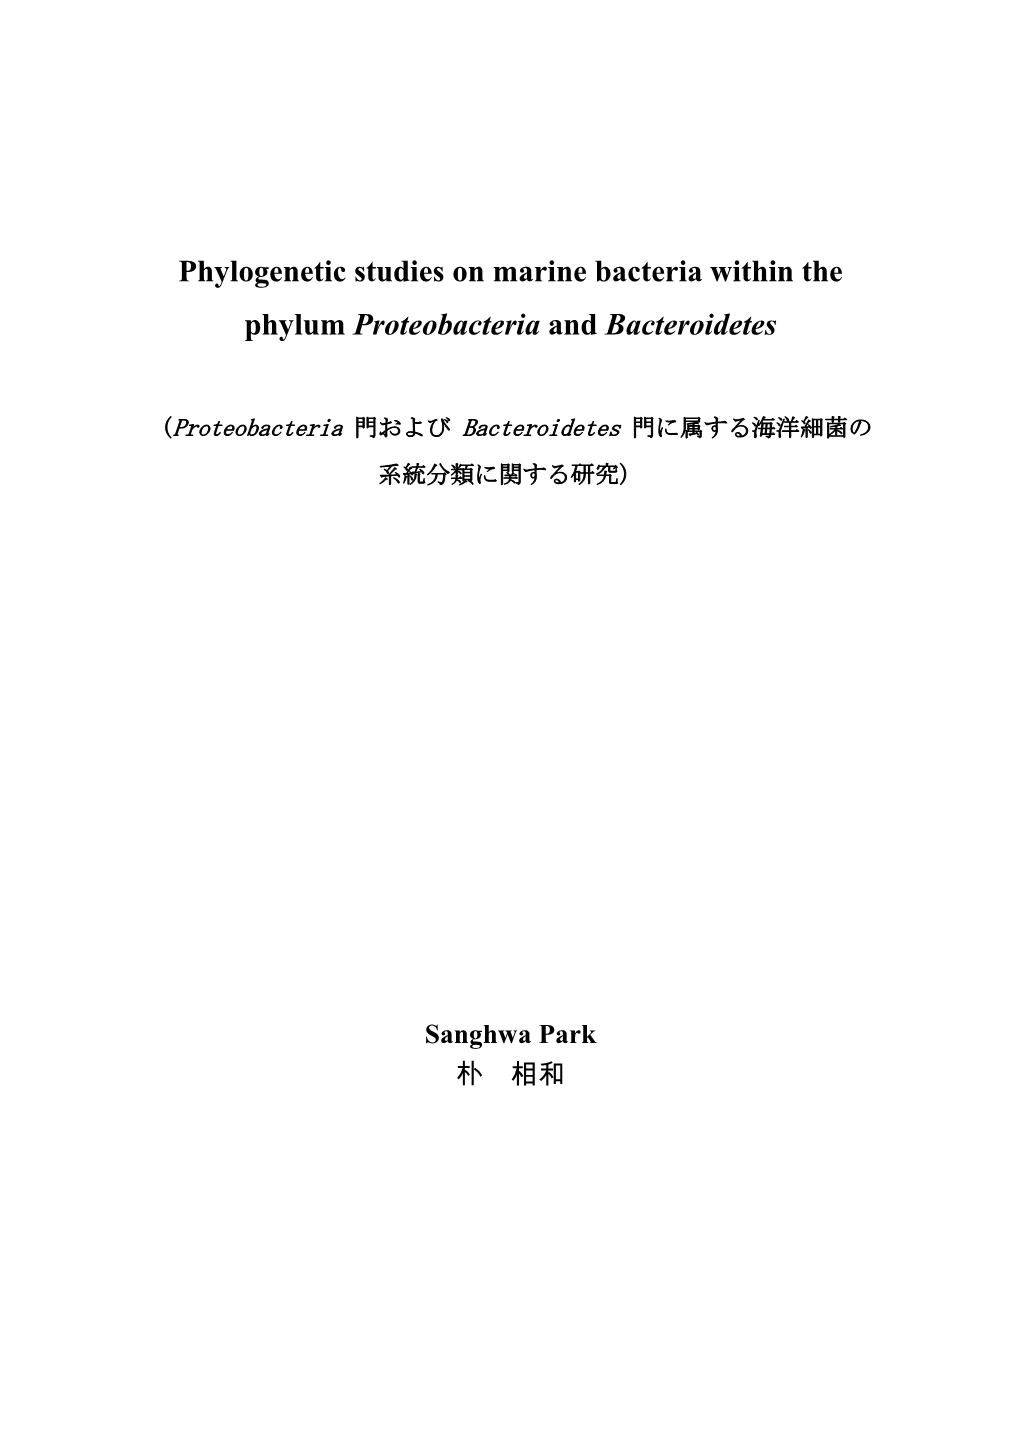 Phylogenetic Studies on Marine Bacteria Within the Phylum Proteobacteria and Bacteroidetes